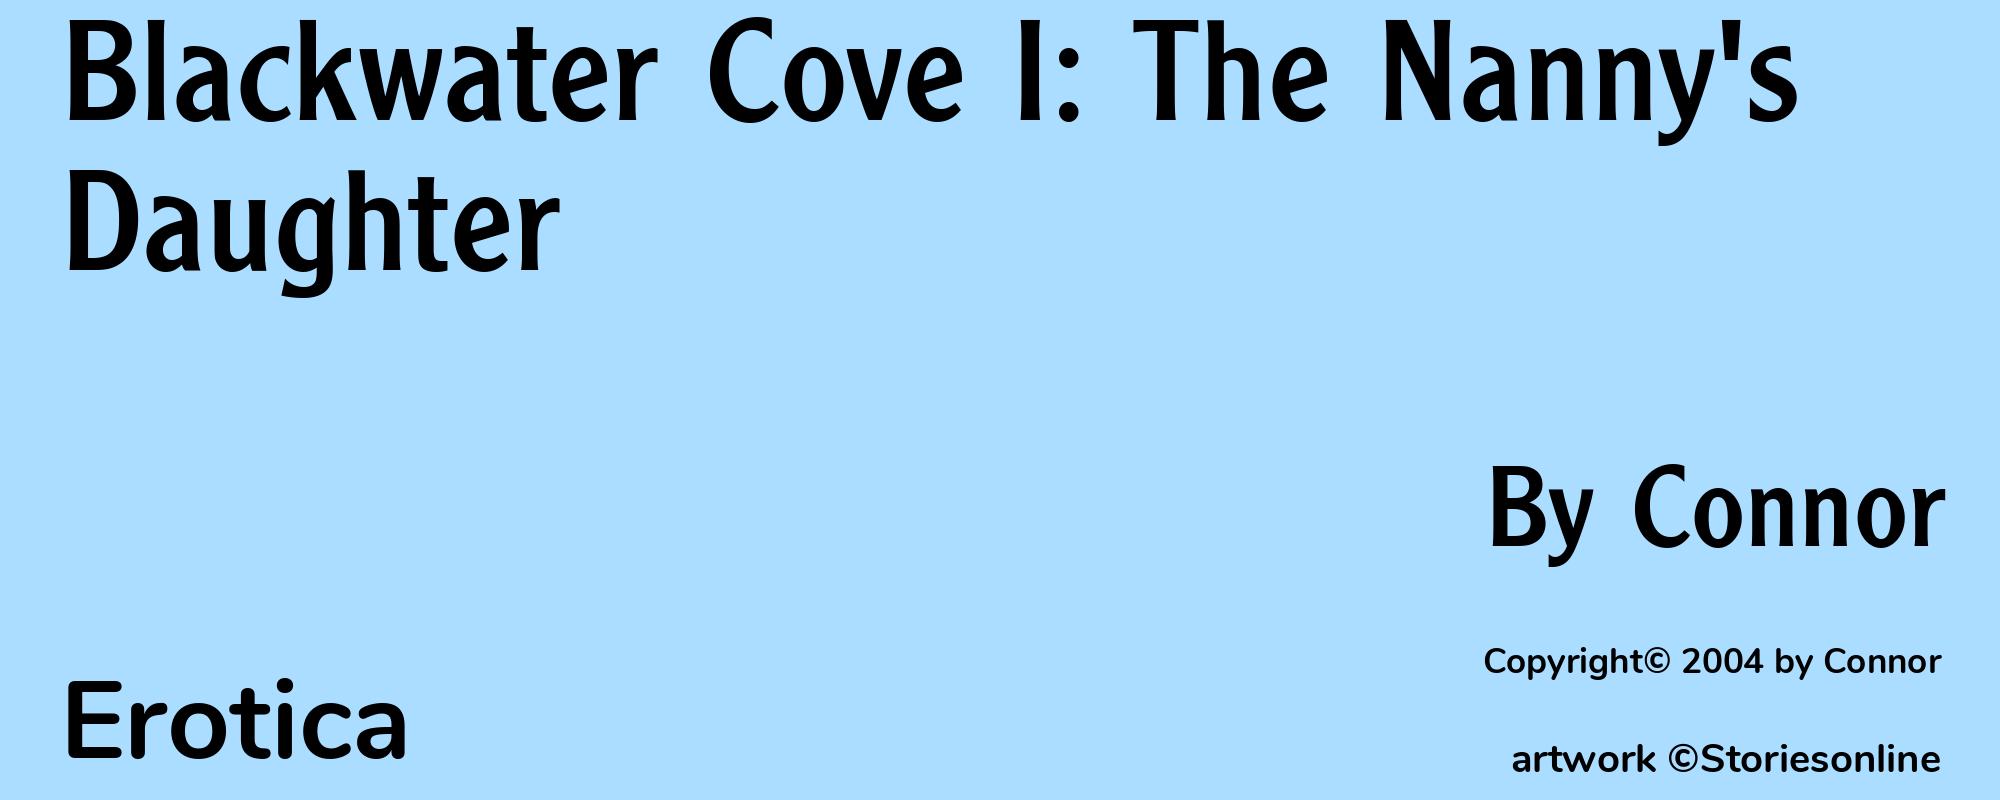 Blackwater Cove I: The Nanny's Daughter - Cover